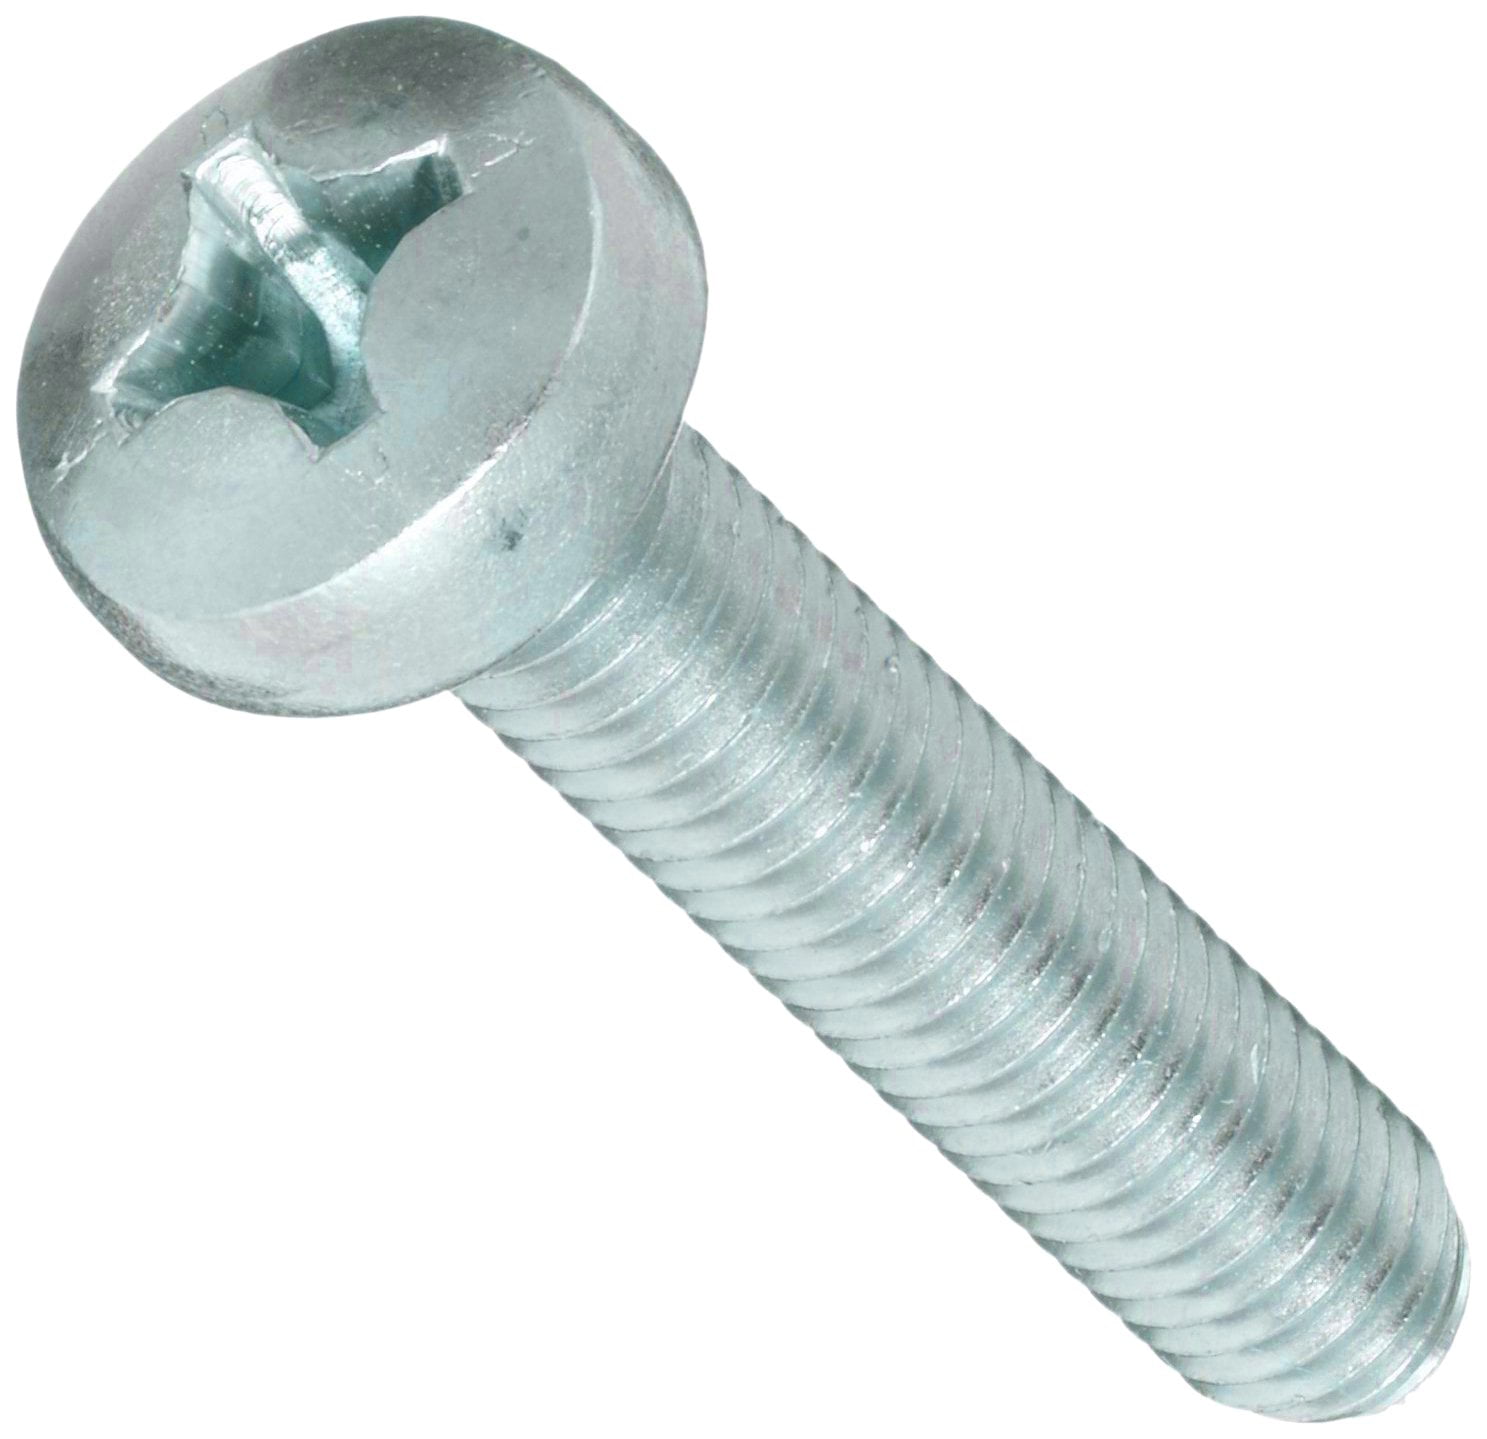 Zinc Plated Finish Pack of 100 Steel Machine Screw Phillips Drive Meets DIN 7985 20mm Length Fully Threaded M2-0.4 Metric Coarse Threads Pan Head 